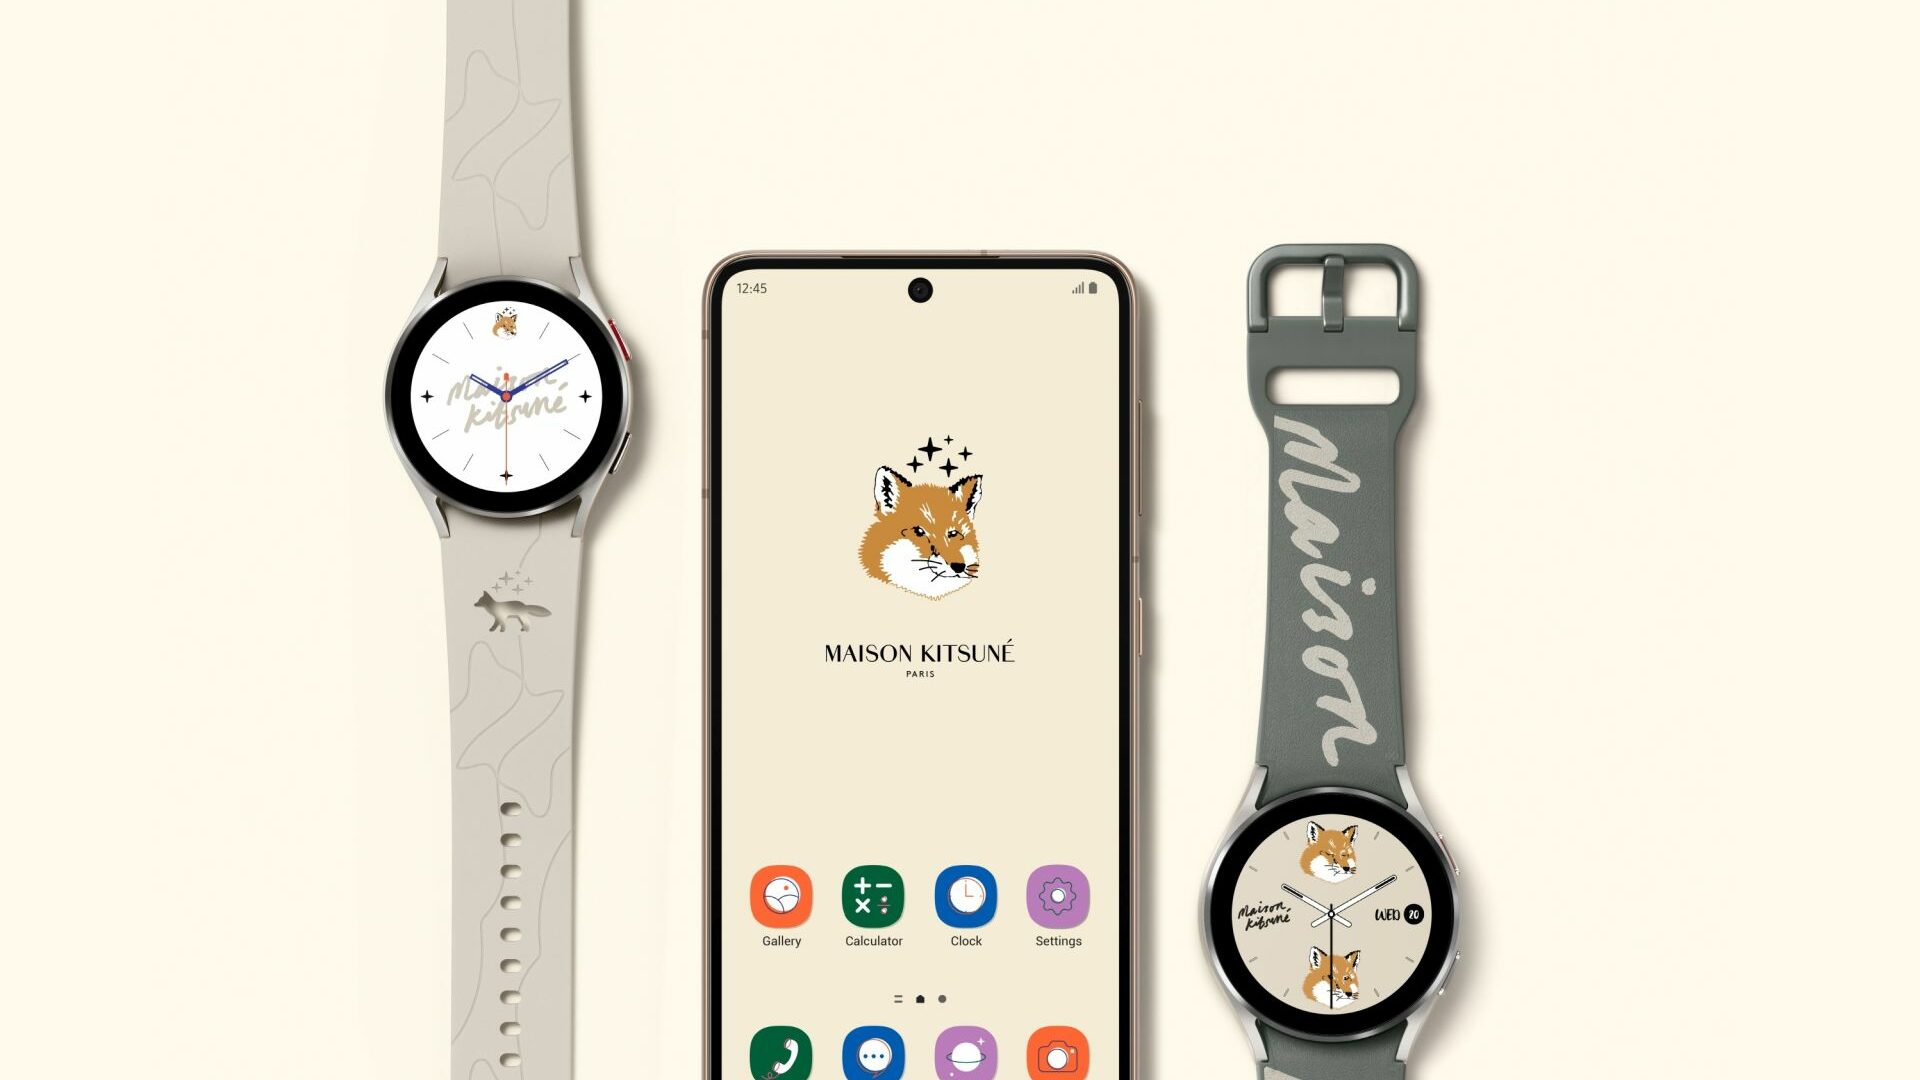 Samsung intros limited-edition Maison Kitsuné Galaxy Watch 4 and